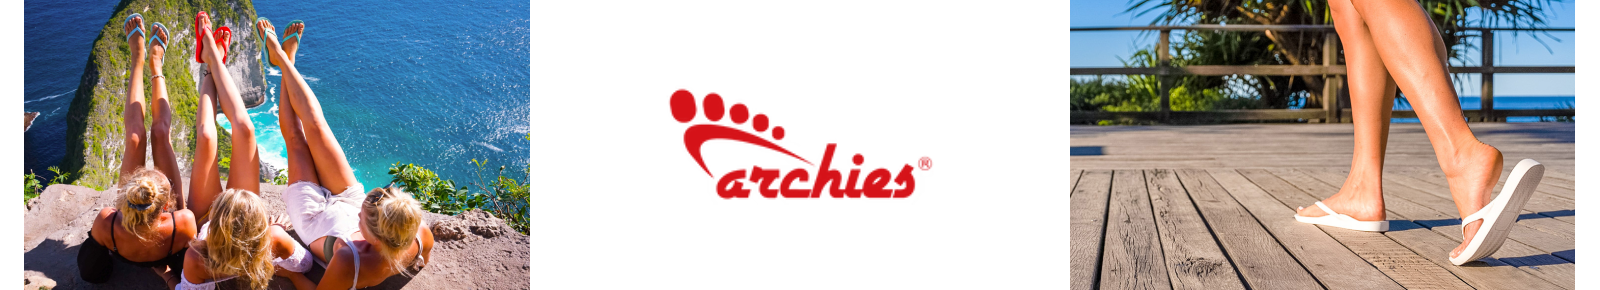 Buy Archies thongs gold coast archies ashmore archies burleigh